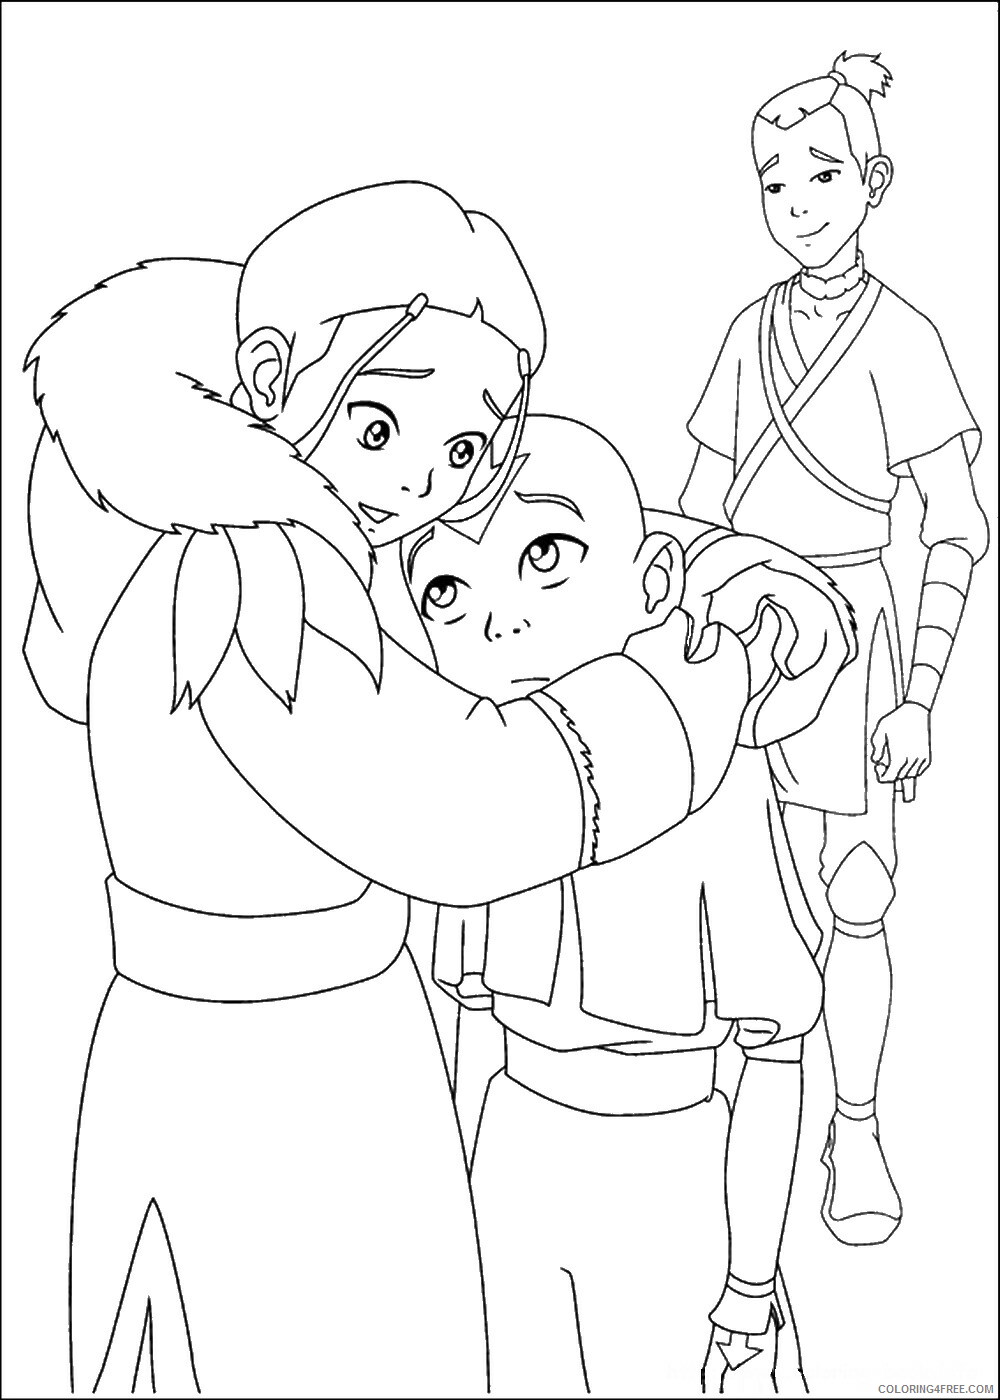 Avatar the Last Airbender Coloring Pages TV Film avatar_cl119 Printable 2020 00277 Coloring4free